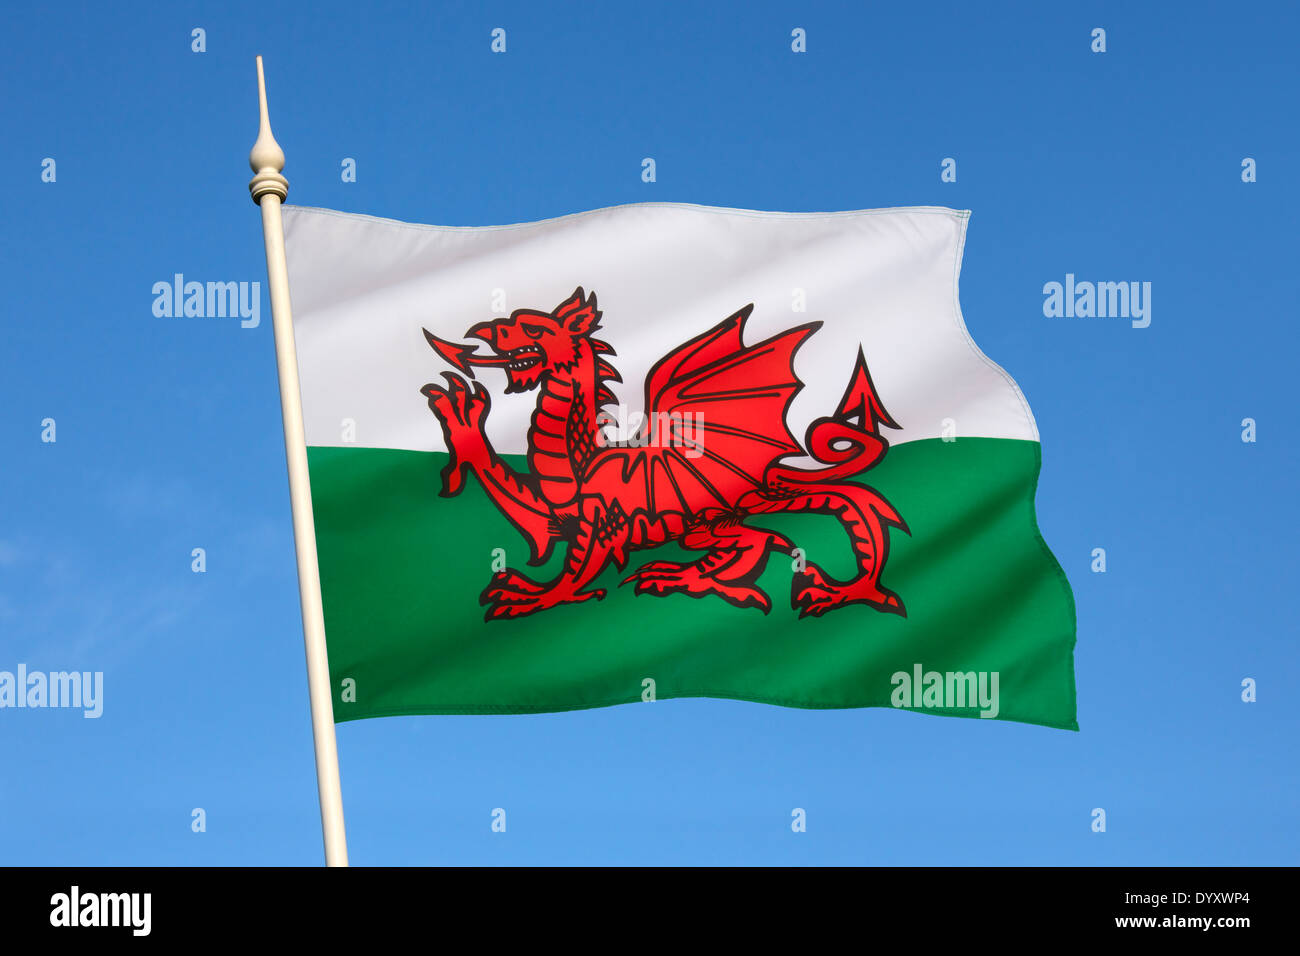 The flag of Wales in the United Kingdom Stock Photo